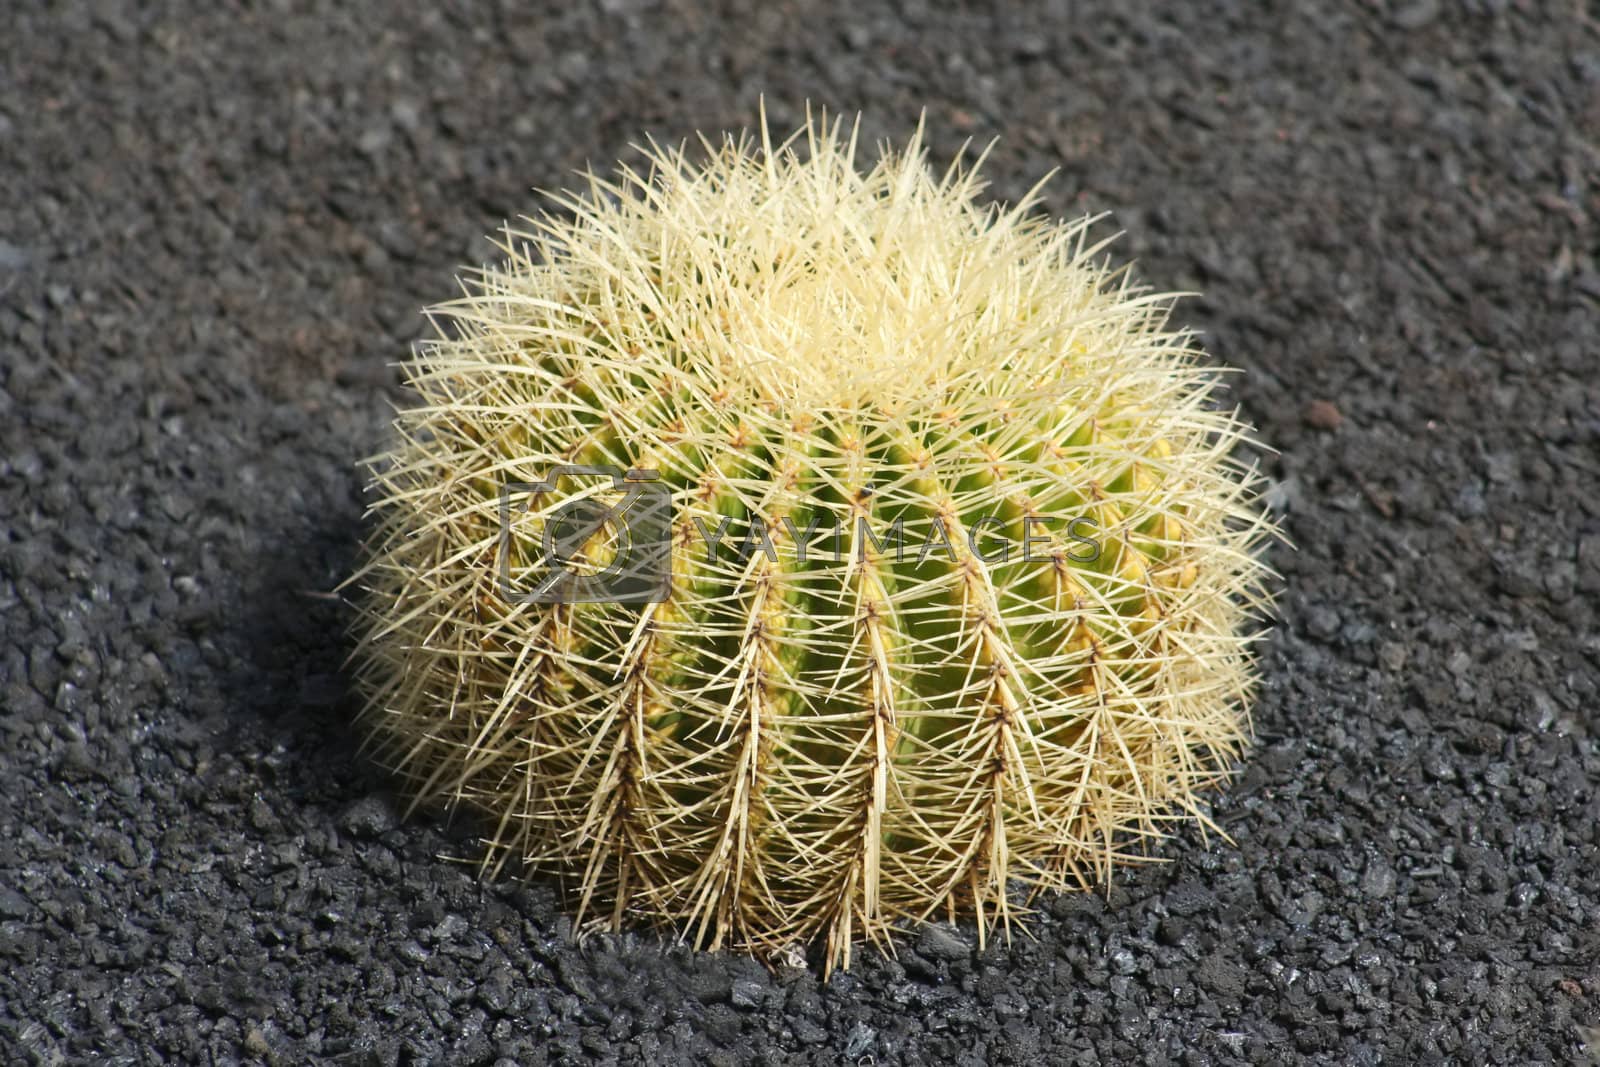 Royalty free image of Very Prickly Cactus by Gala98